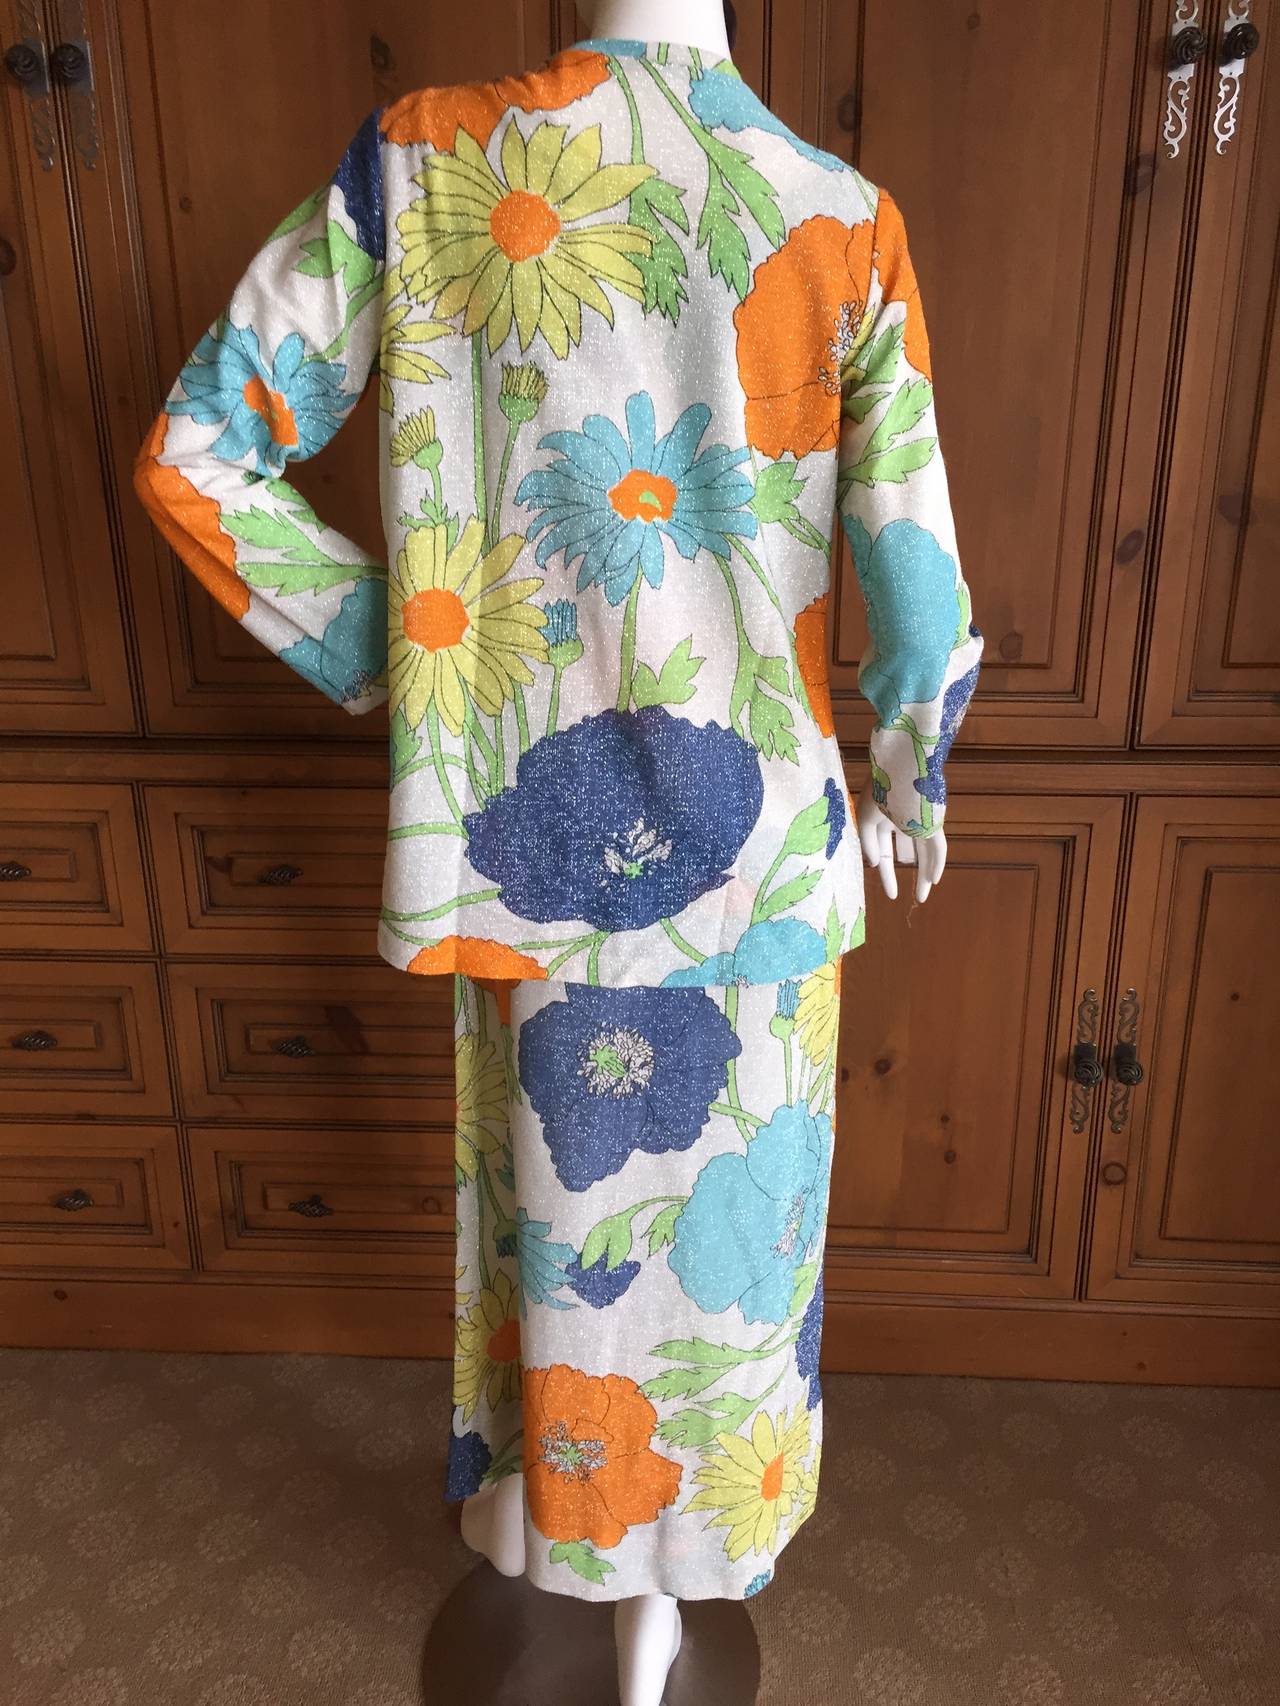 The Lilly by Lilly Pulitzer Sleeveless Floral Dress & Jacket For Sale 2